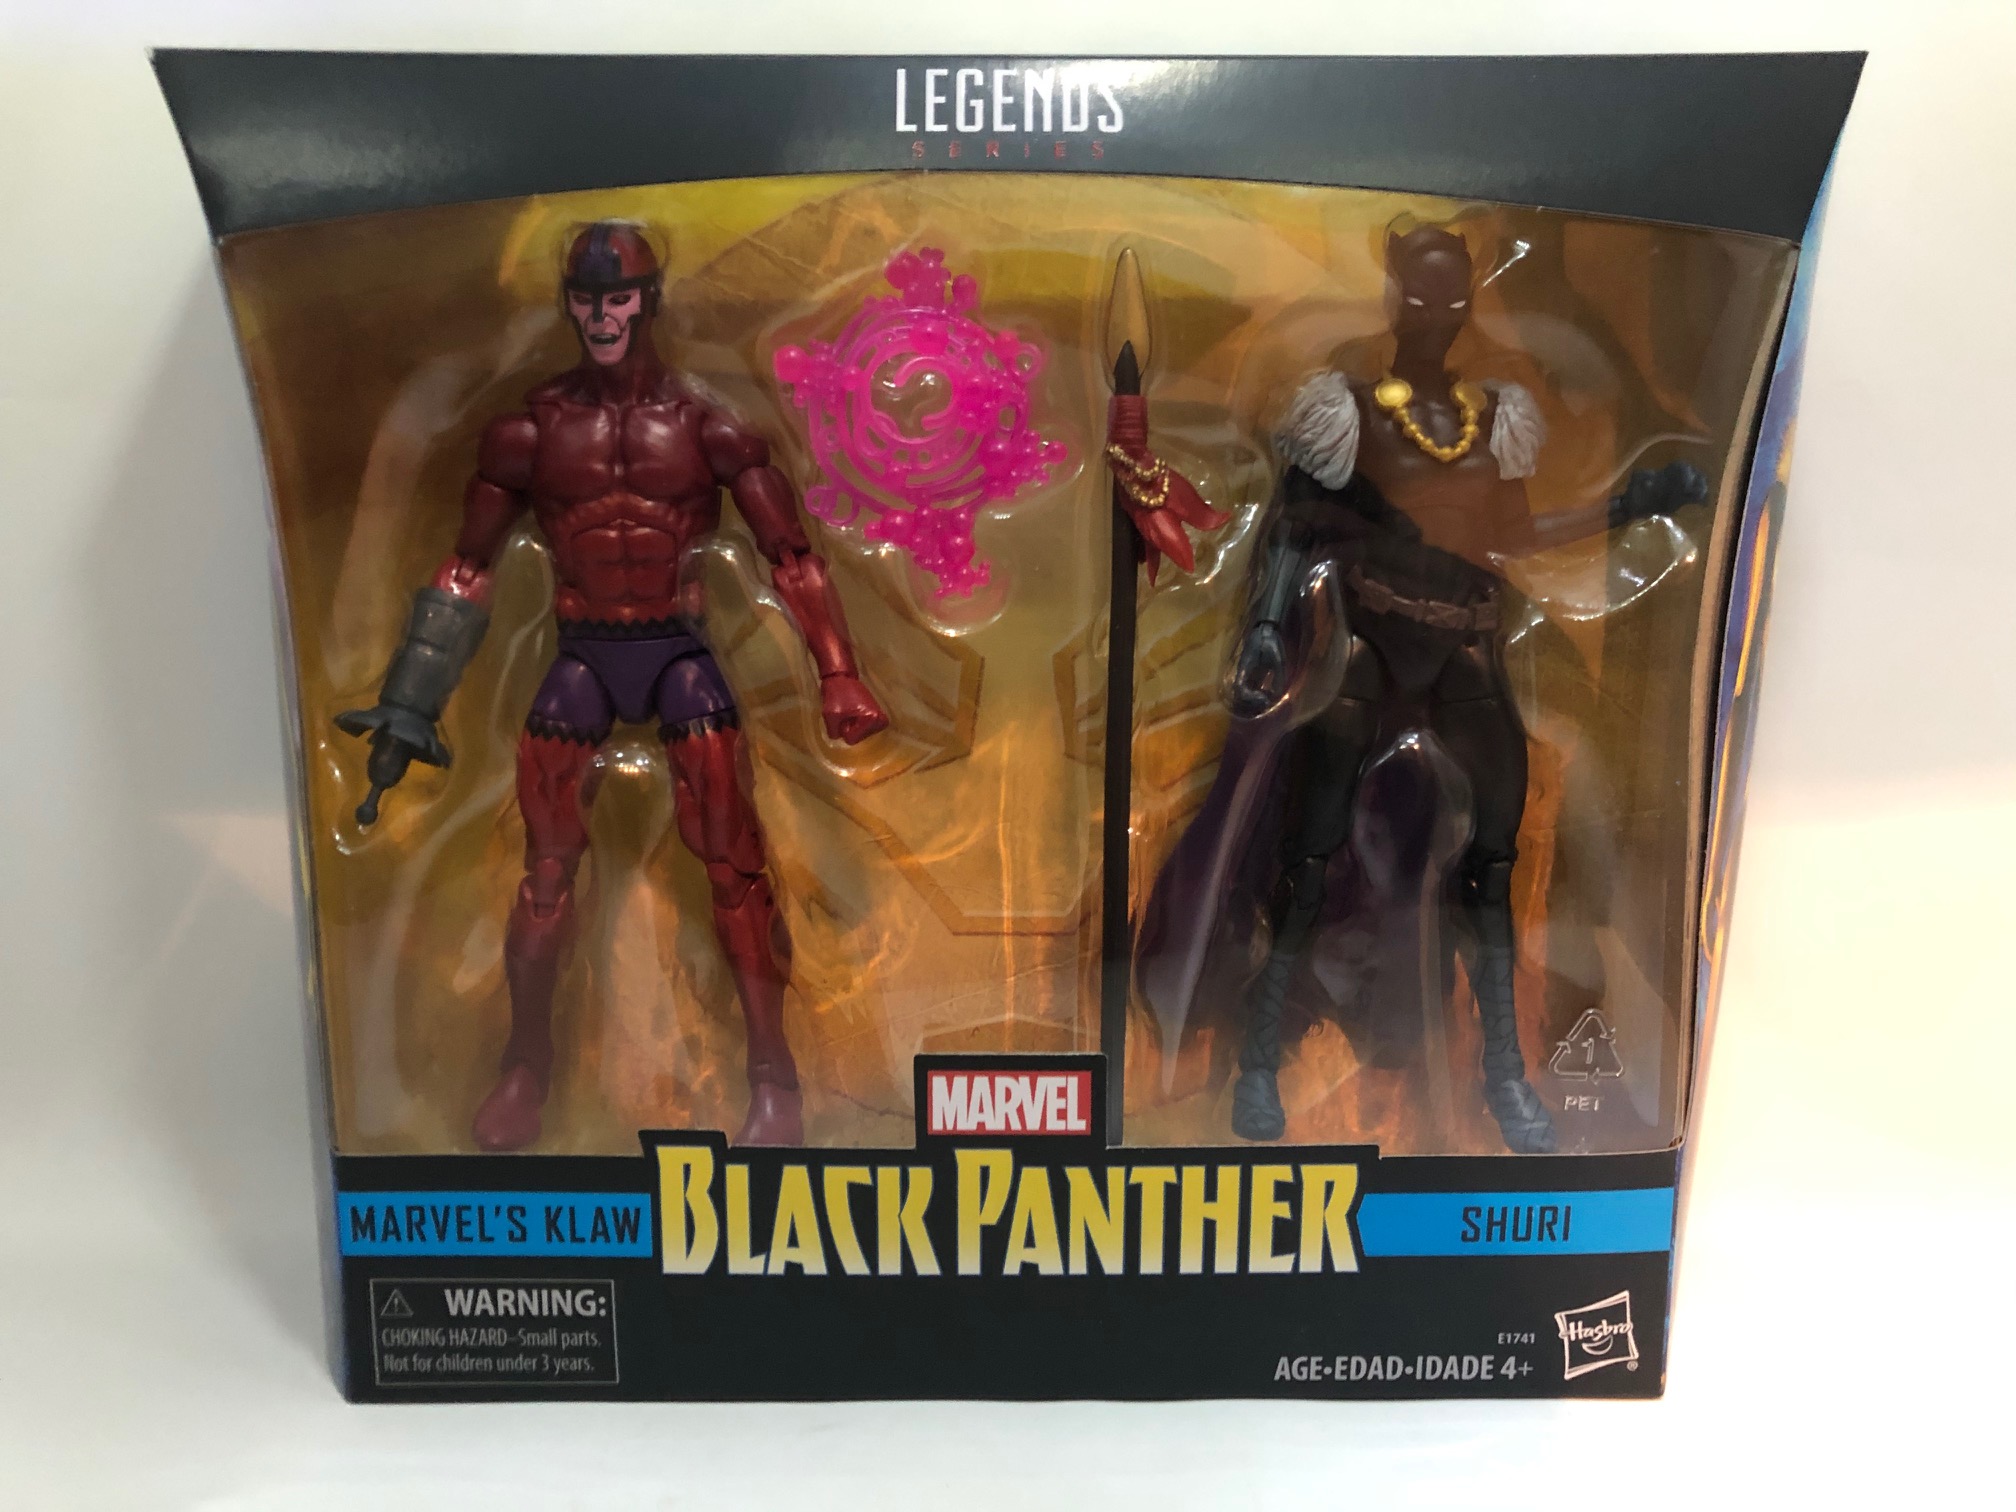 black panther figure 6 inch